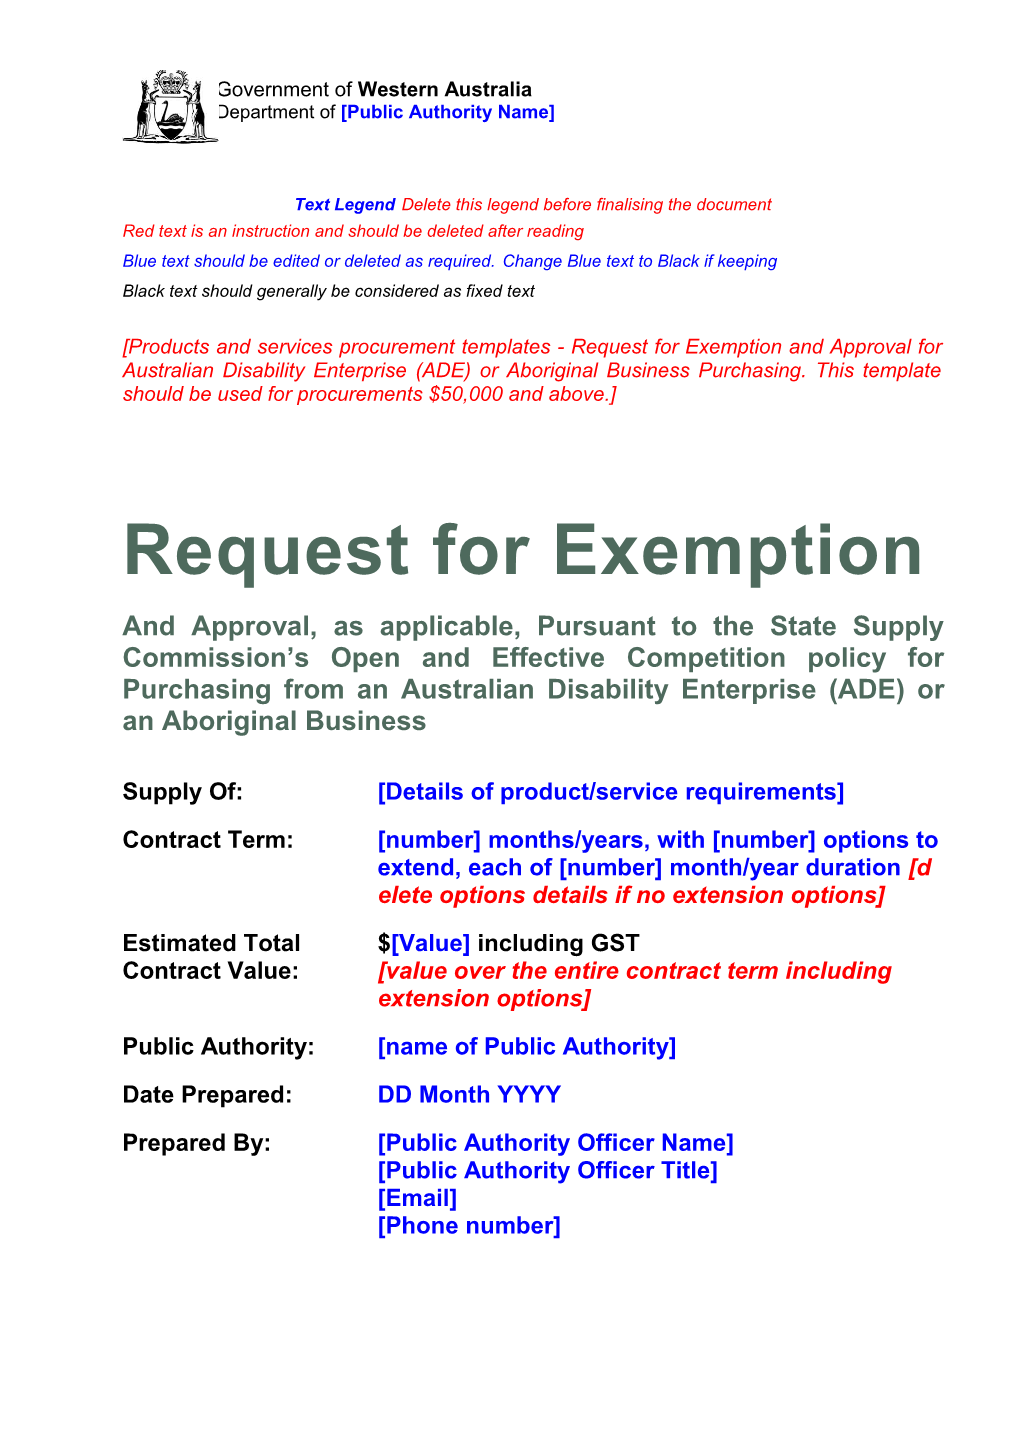 Request for Exemption - ADE and Aboriginal Business Purchasing